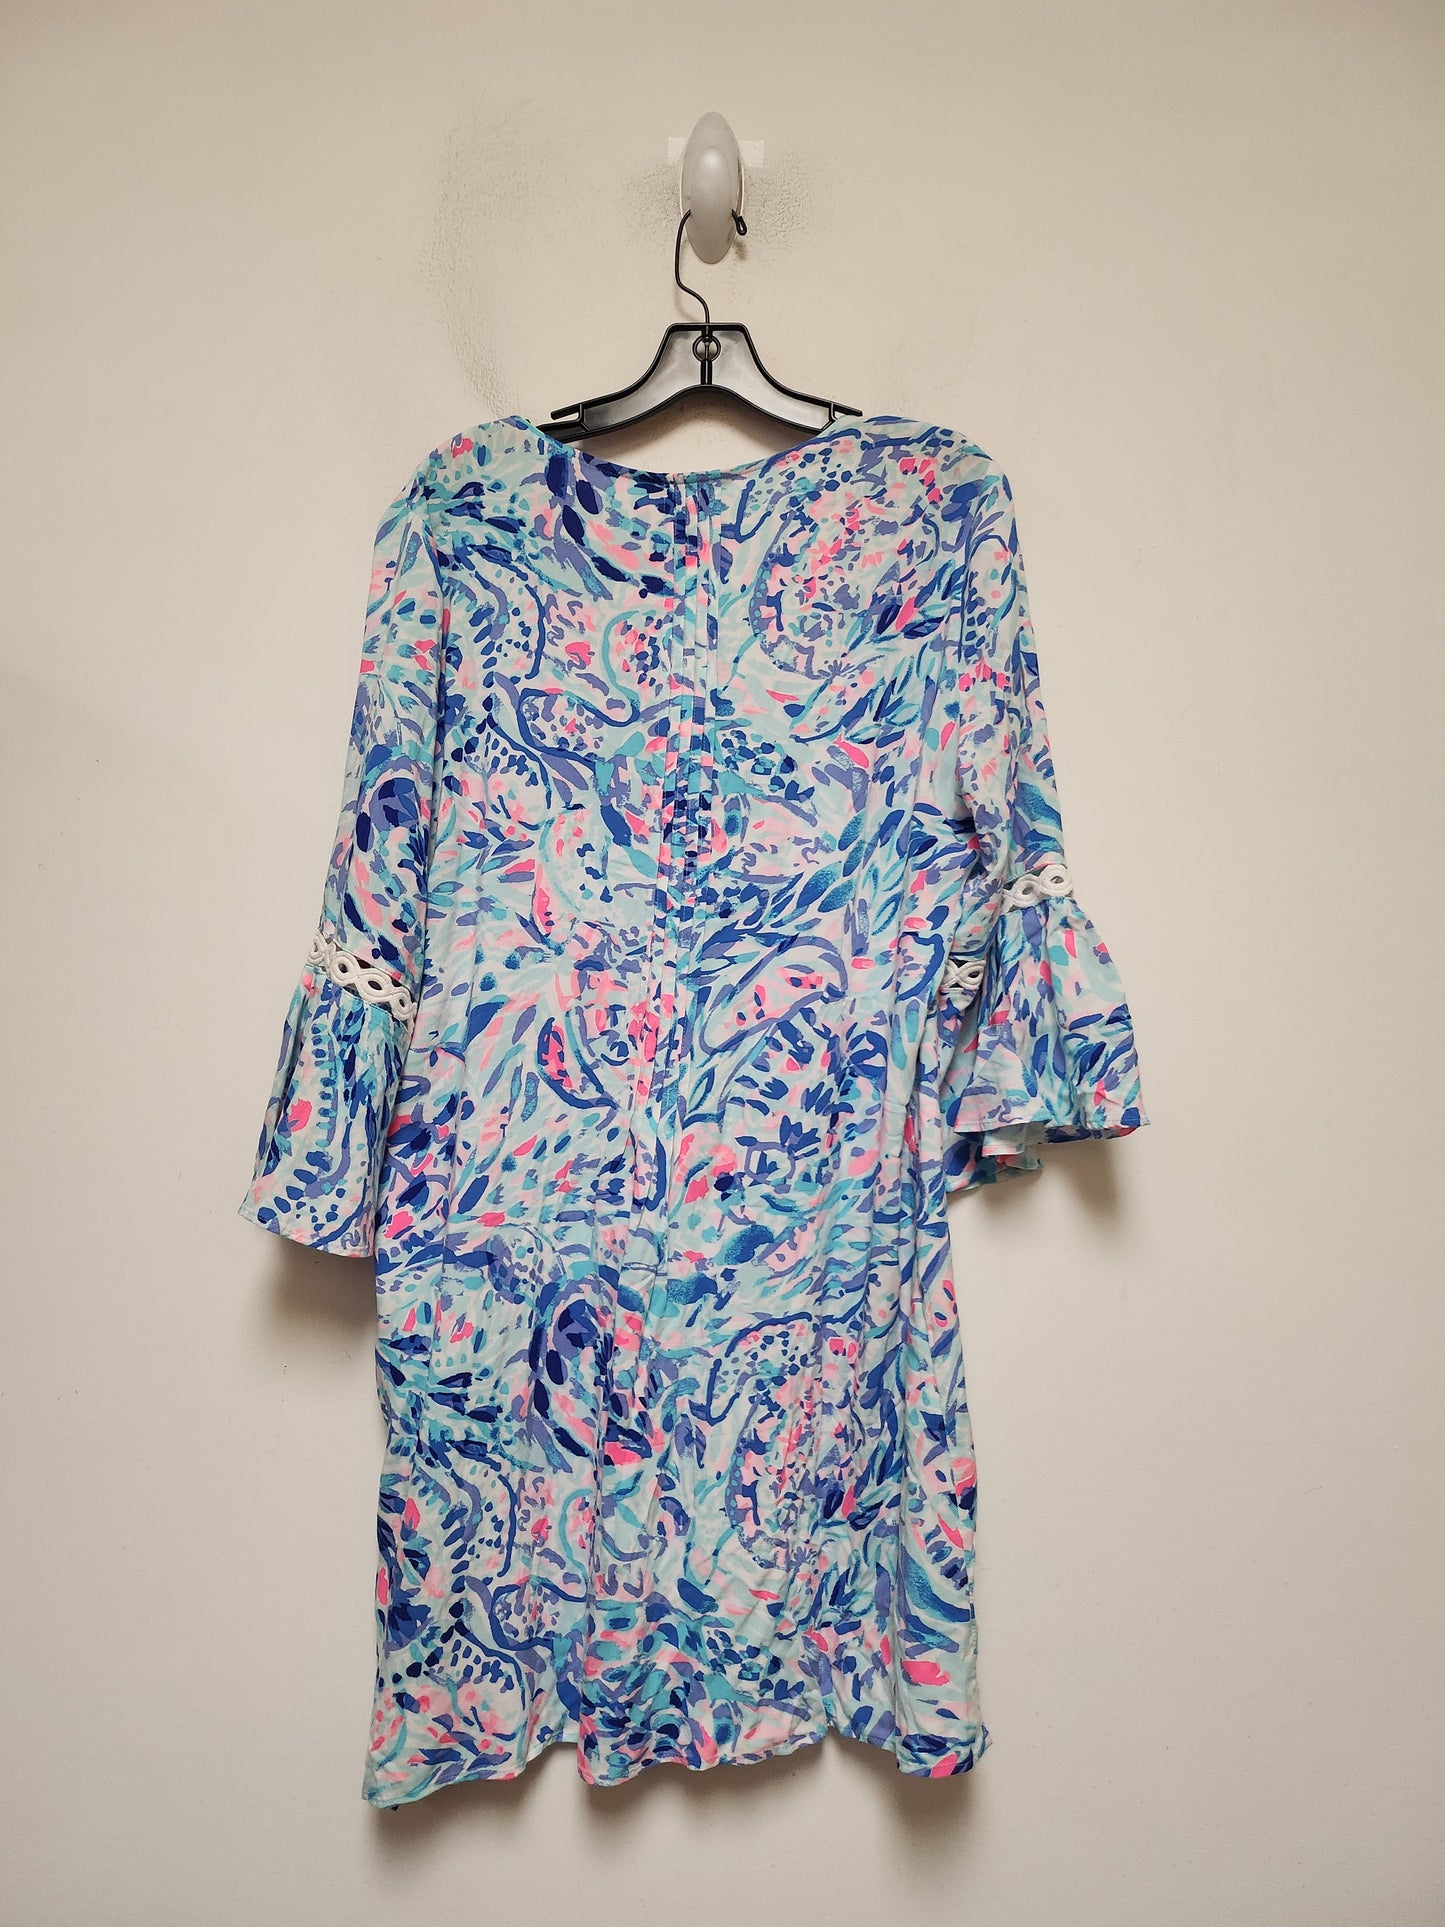 Multi-colored Dress Casual Short Lilly Pulitzer, Size L